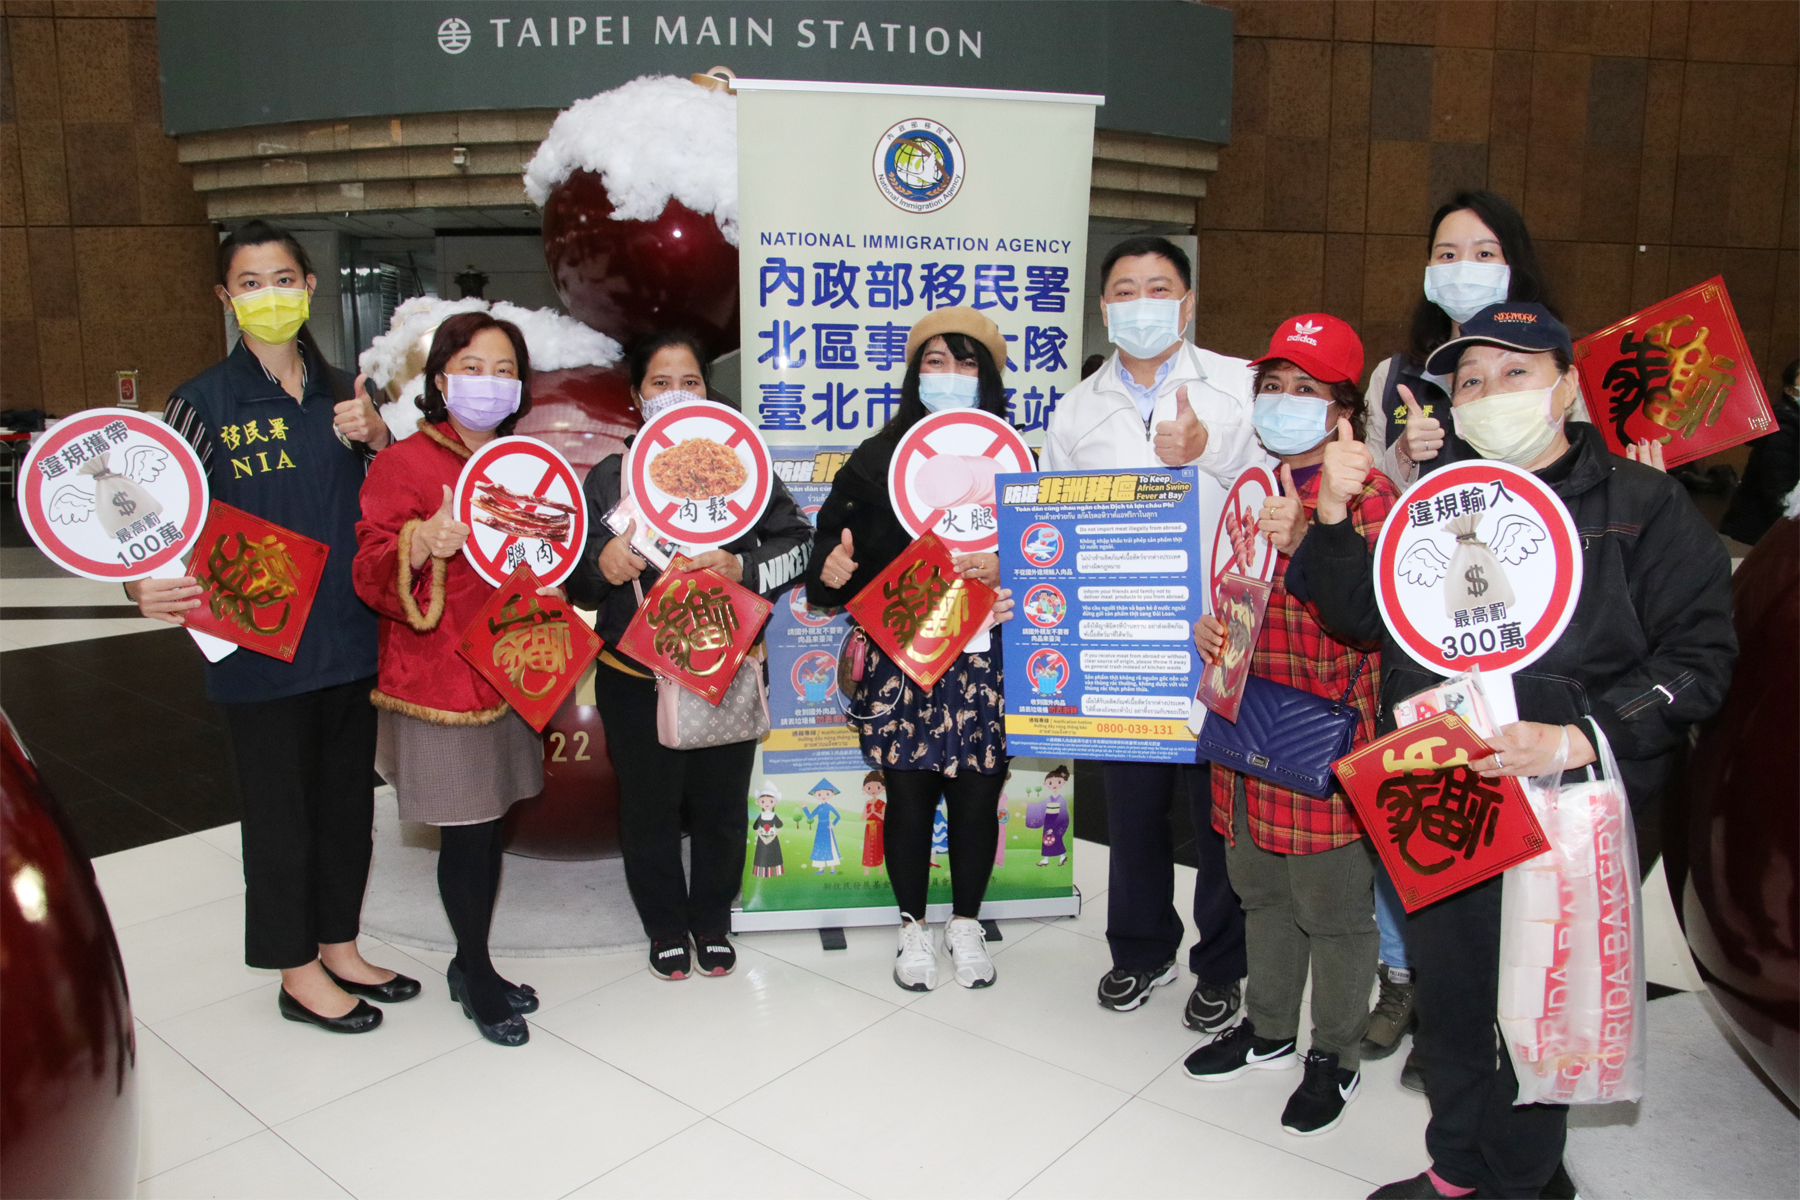 NIA promoted “Prevention of African Swine Fever” to migrant workers. (Photo / Provided by Taipei City Service Center)